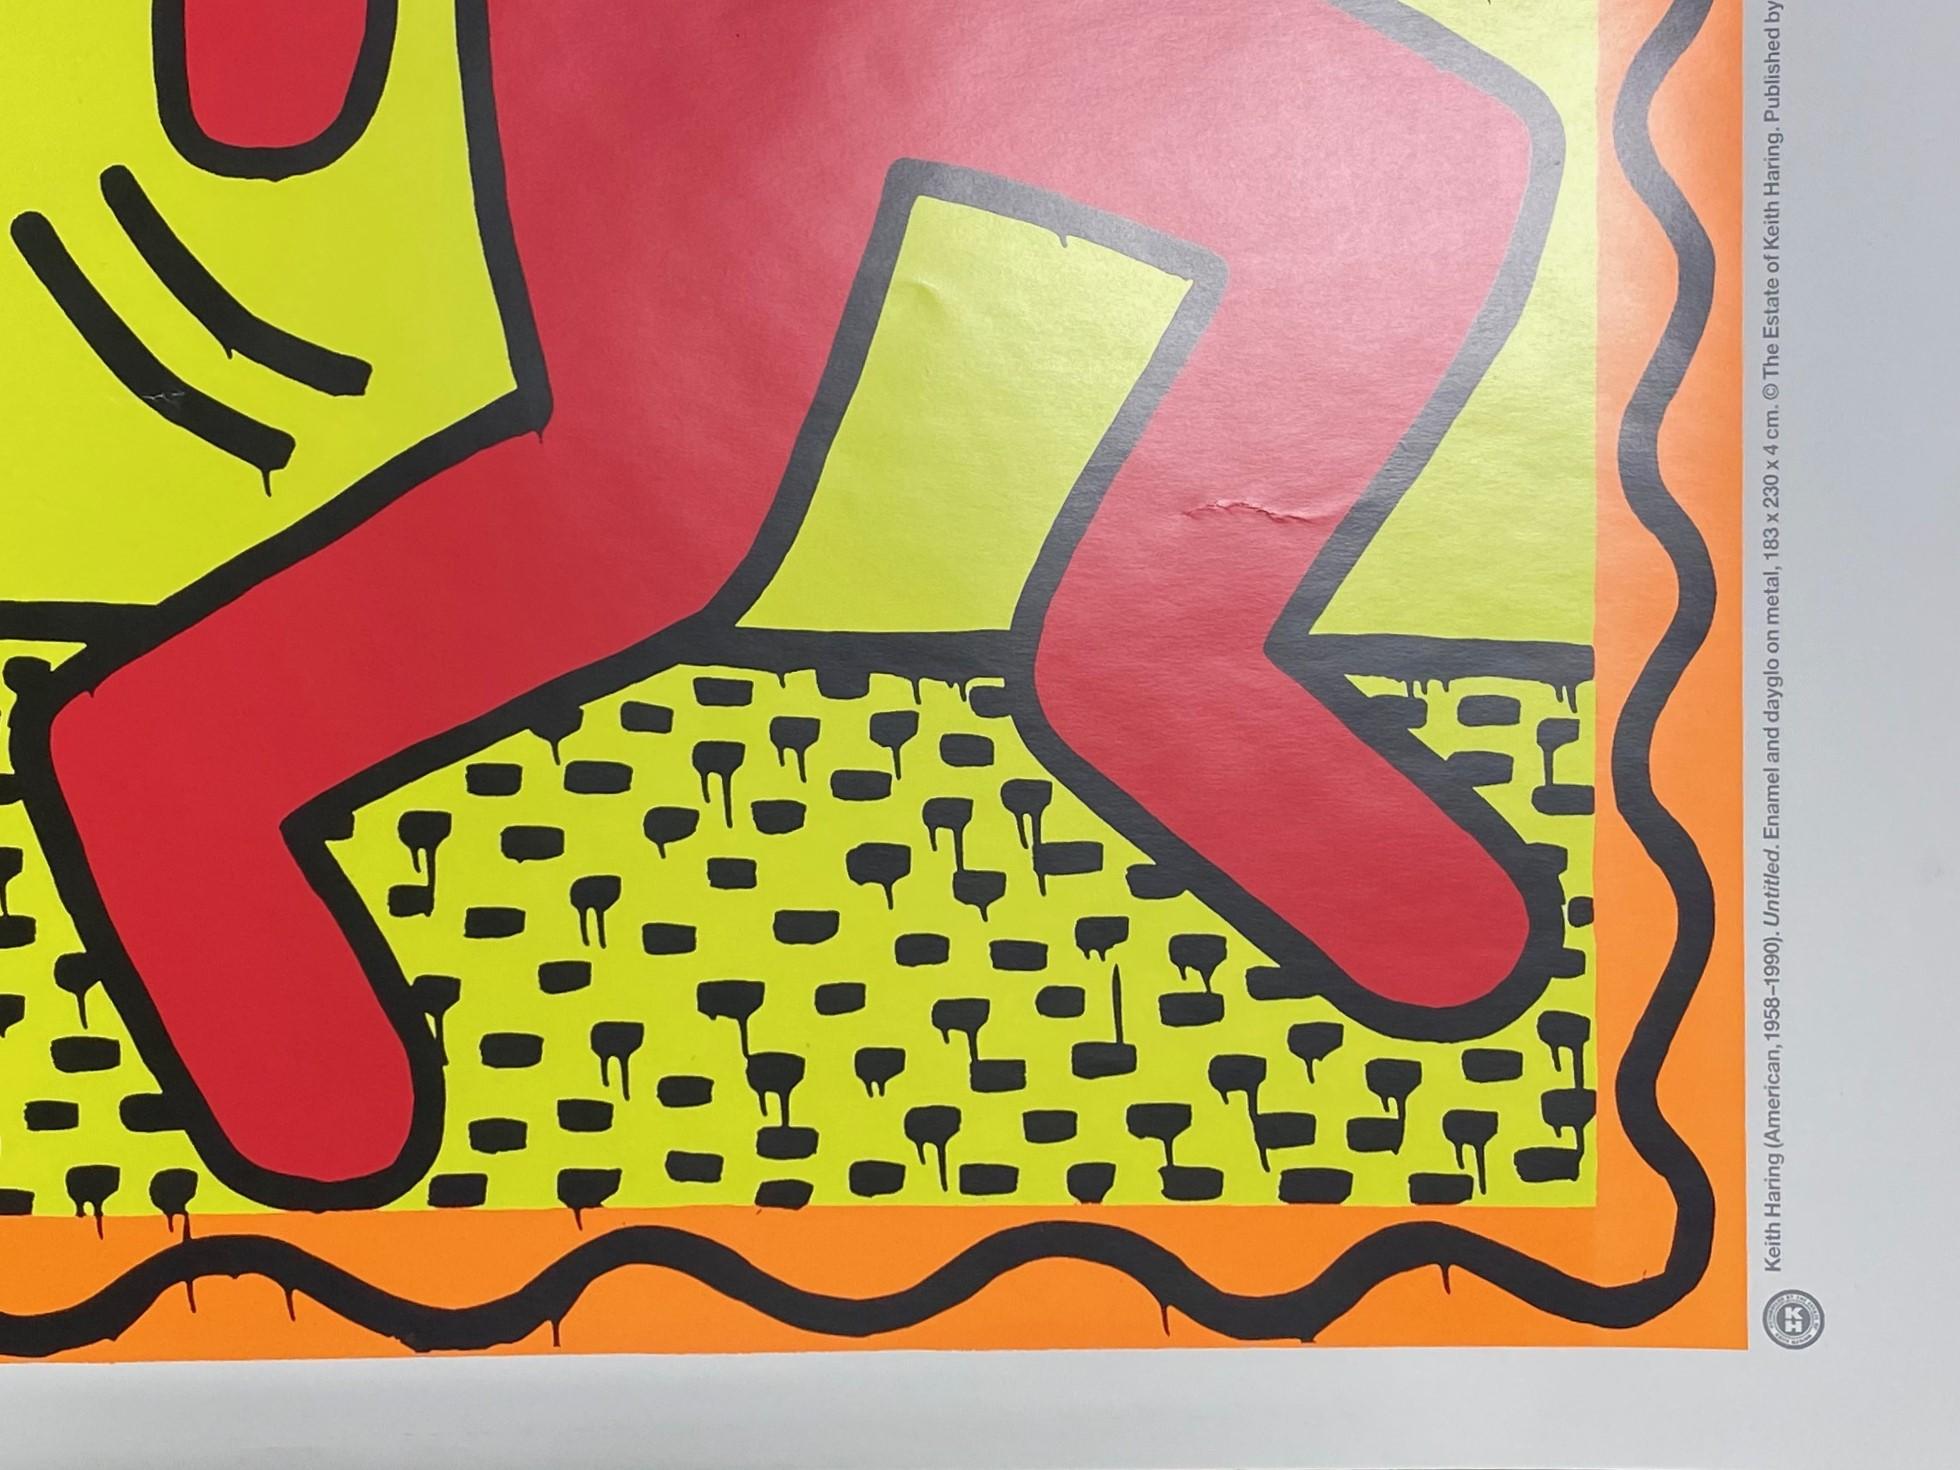 Paper Keith Haring Vintage NYC Pop Shop Art Lithograph Poster Dancing Dogs Wolves 1991 For Sale